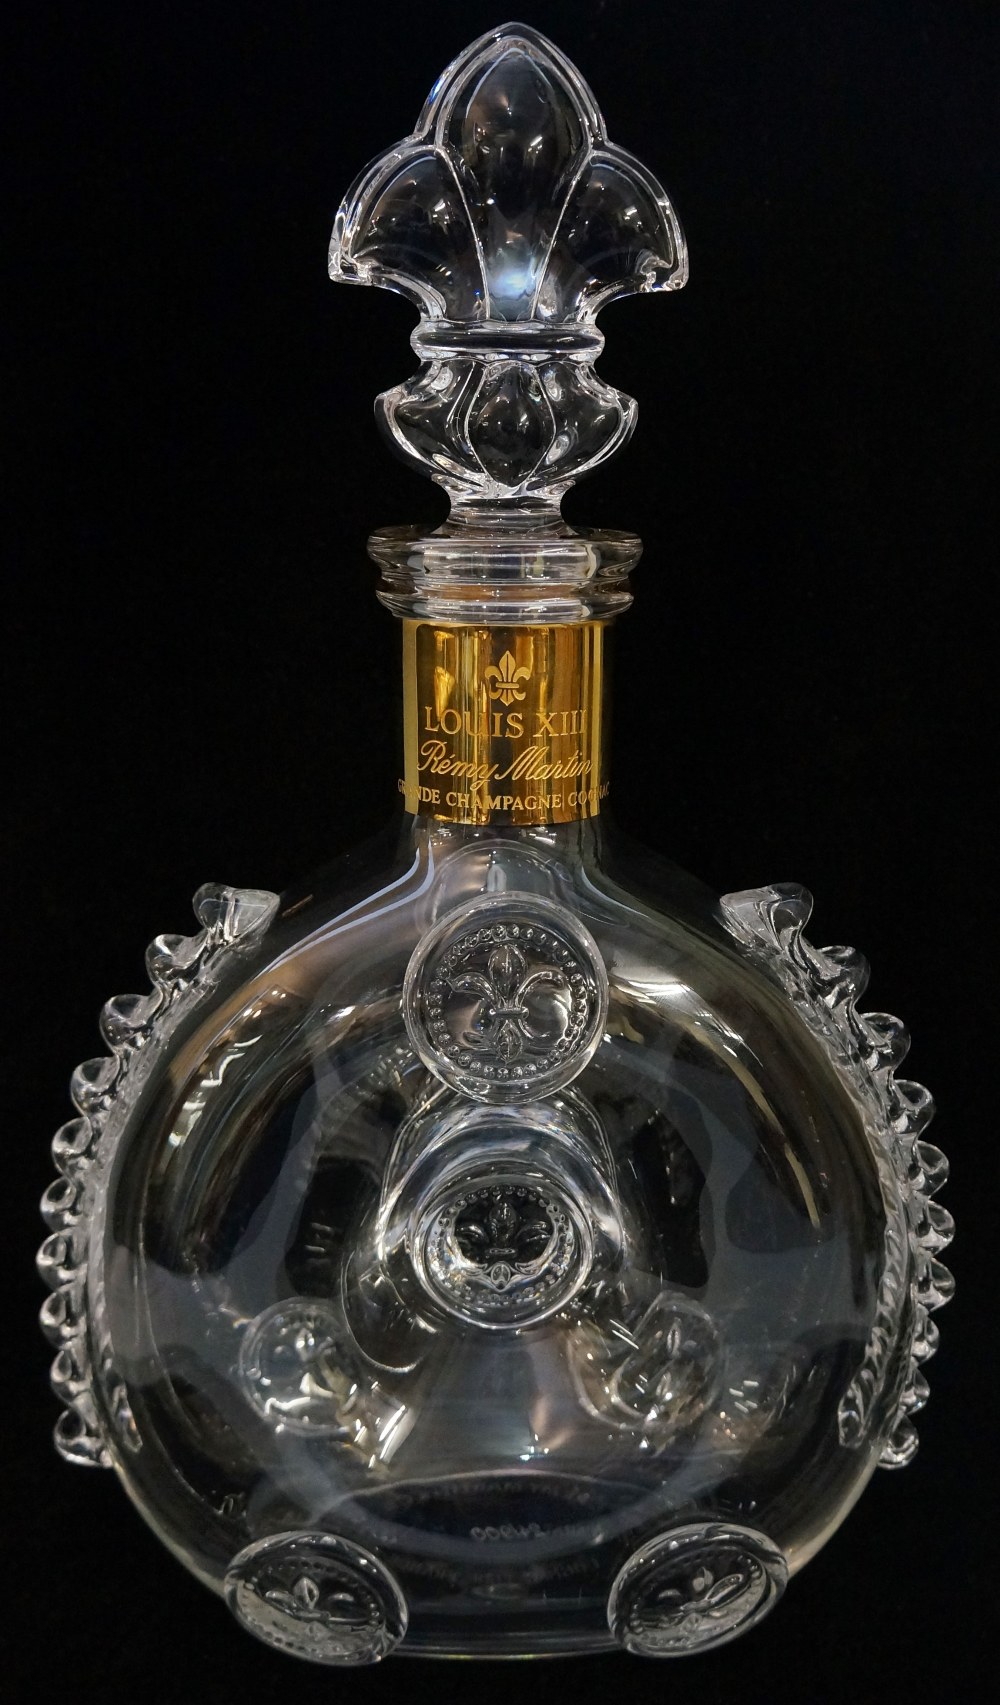 A limited edition (24/900) Louis XIII Remy Martin Grande Champagne Cognac glass decanter by